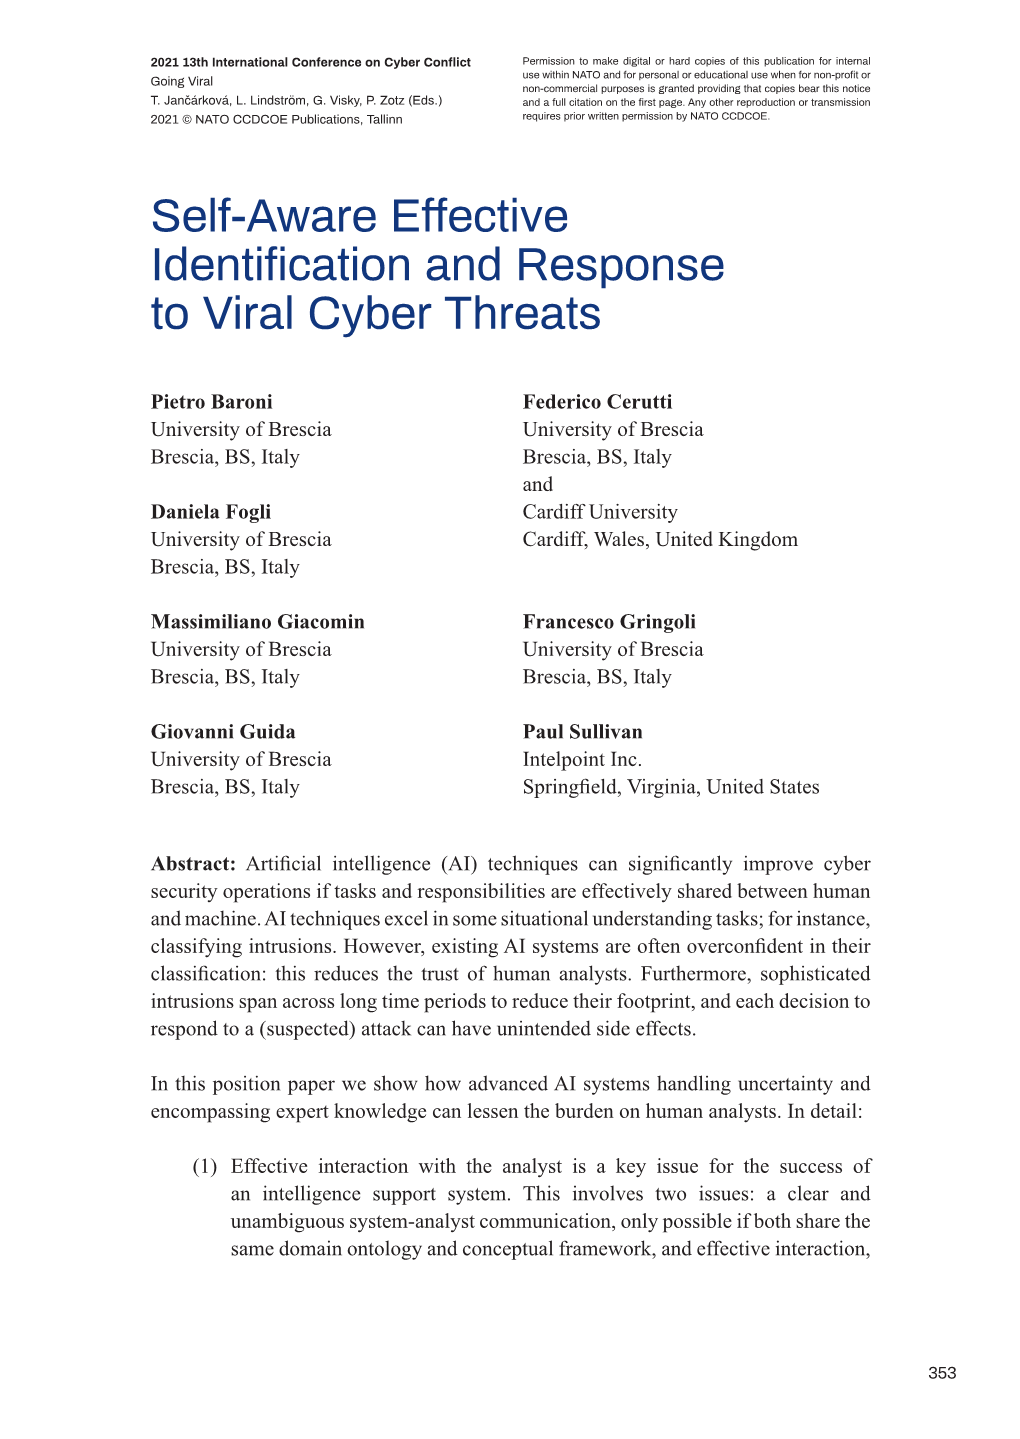 Self-Aware Effective Identification and Response to Viral Cyber Threats